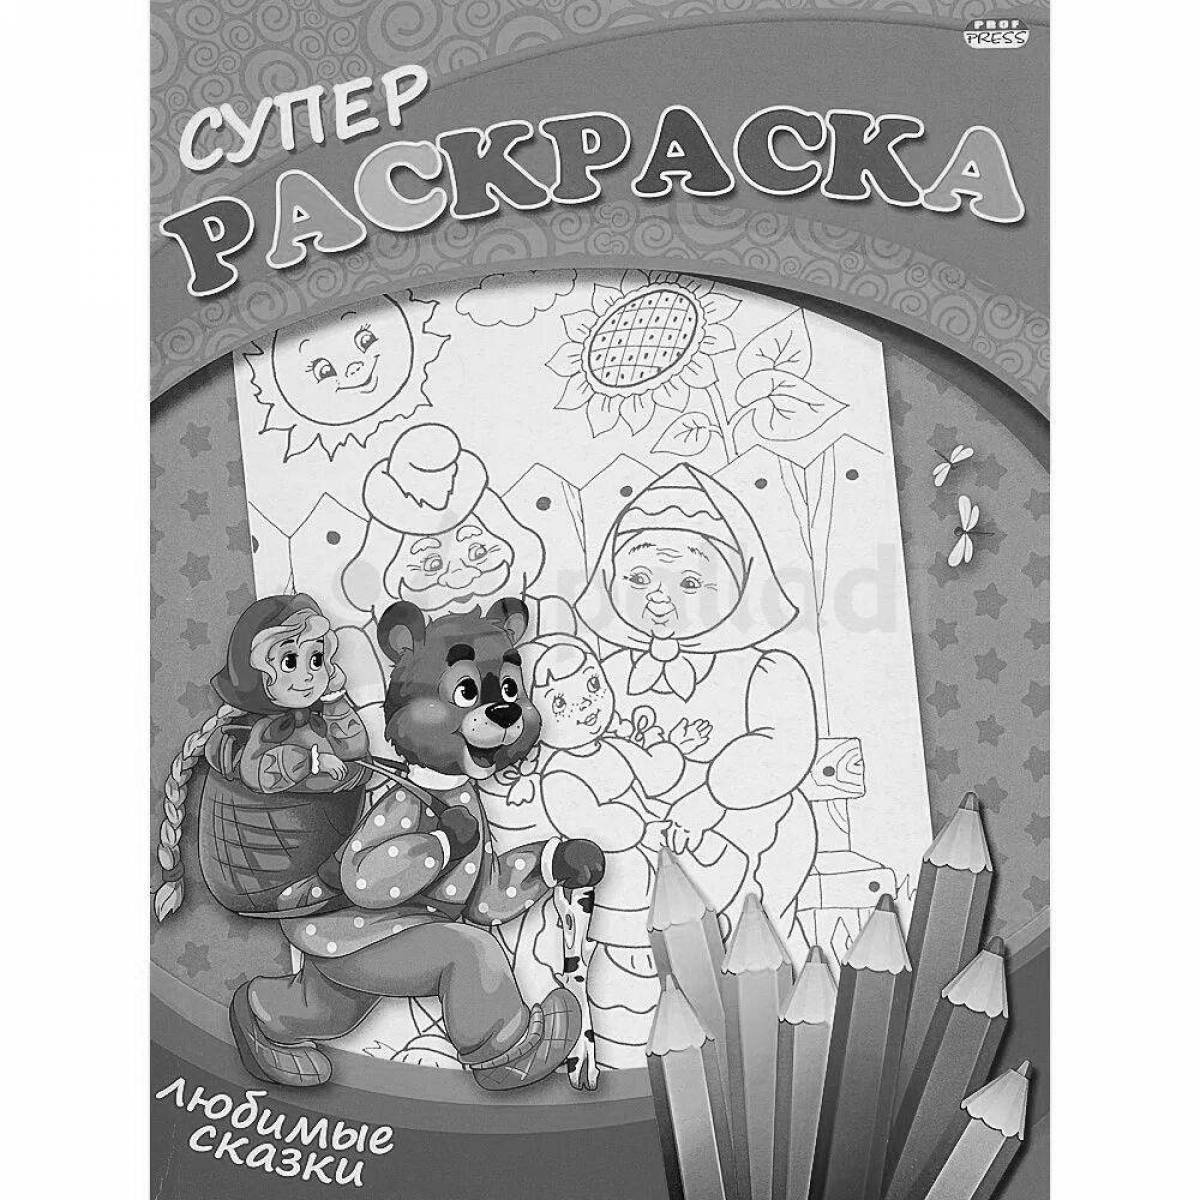 Amazing children's book cover coloring page